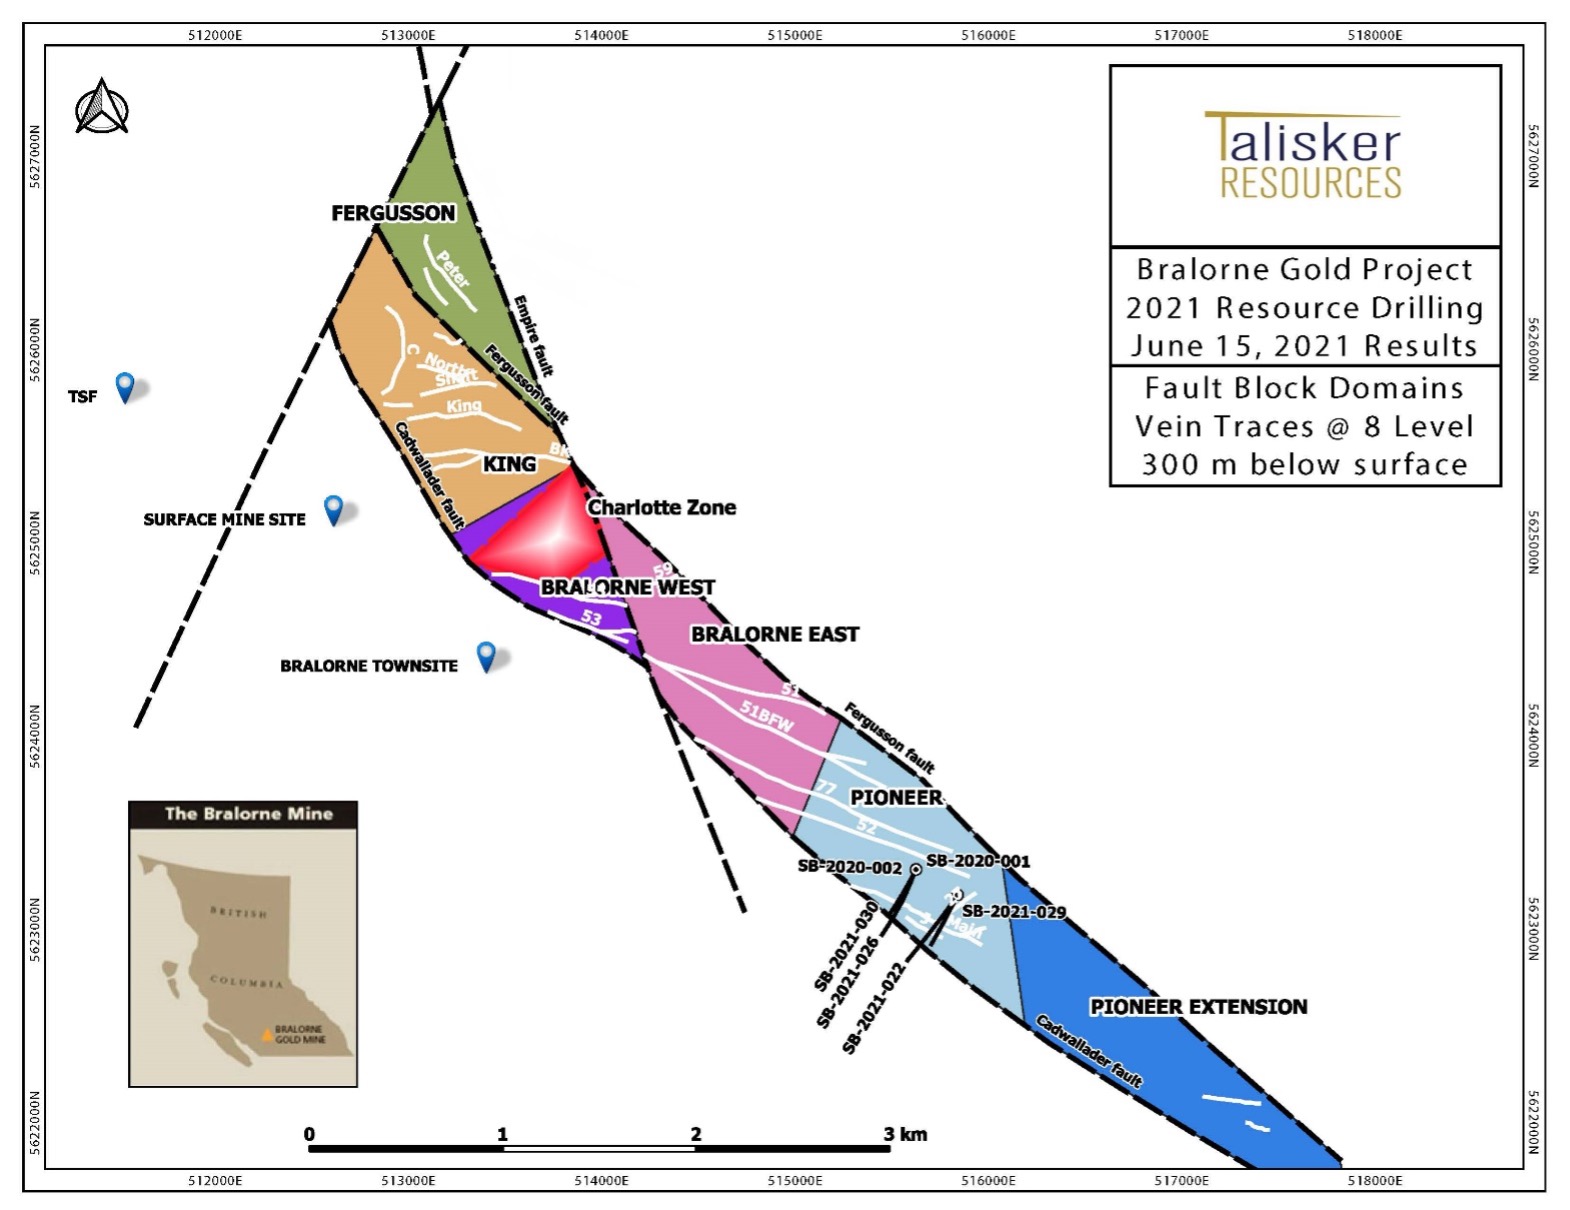 Talisker Resources Ltd., Tuesday, June 22, 2021, Press release picture